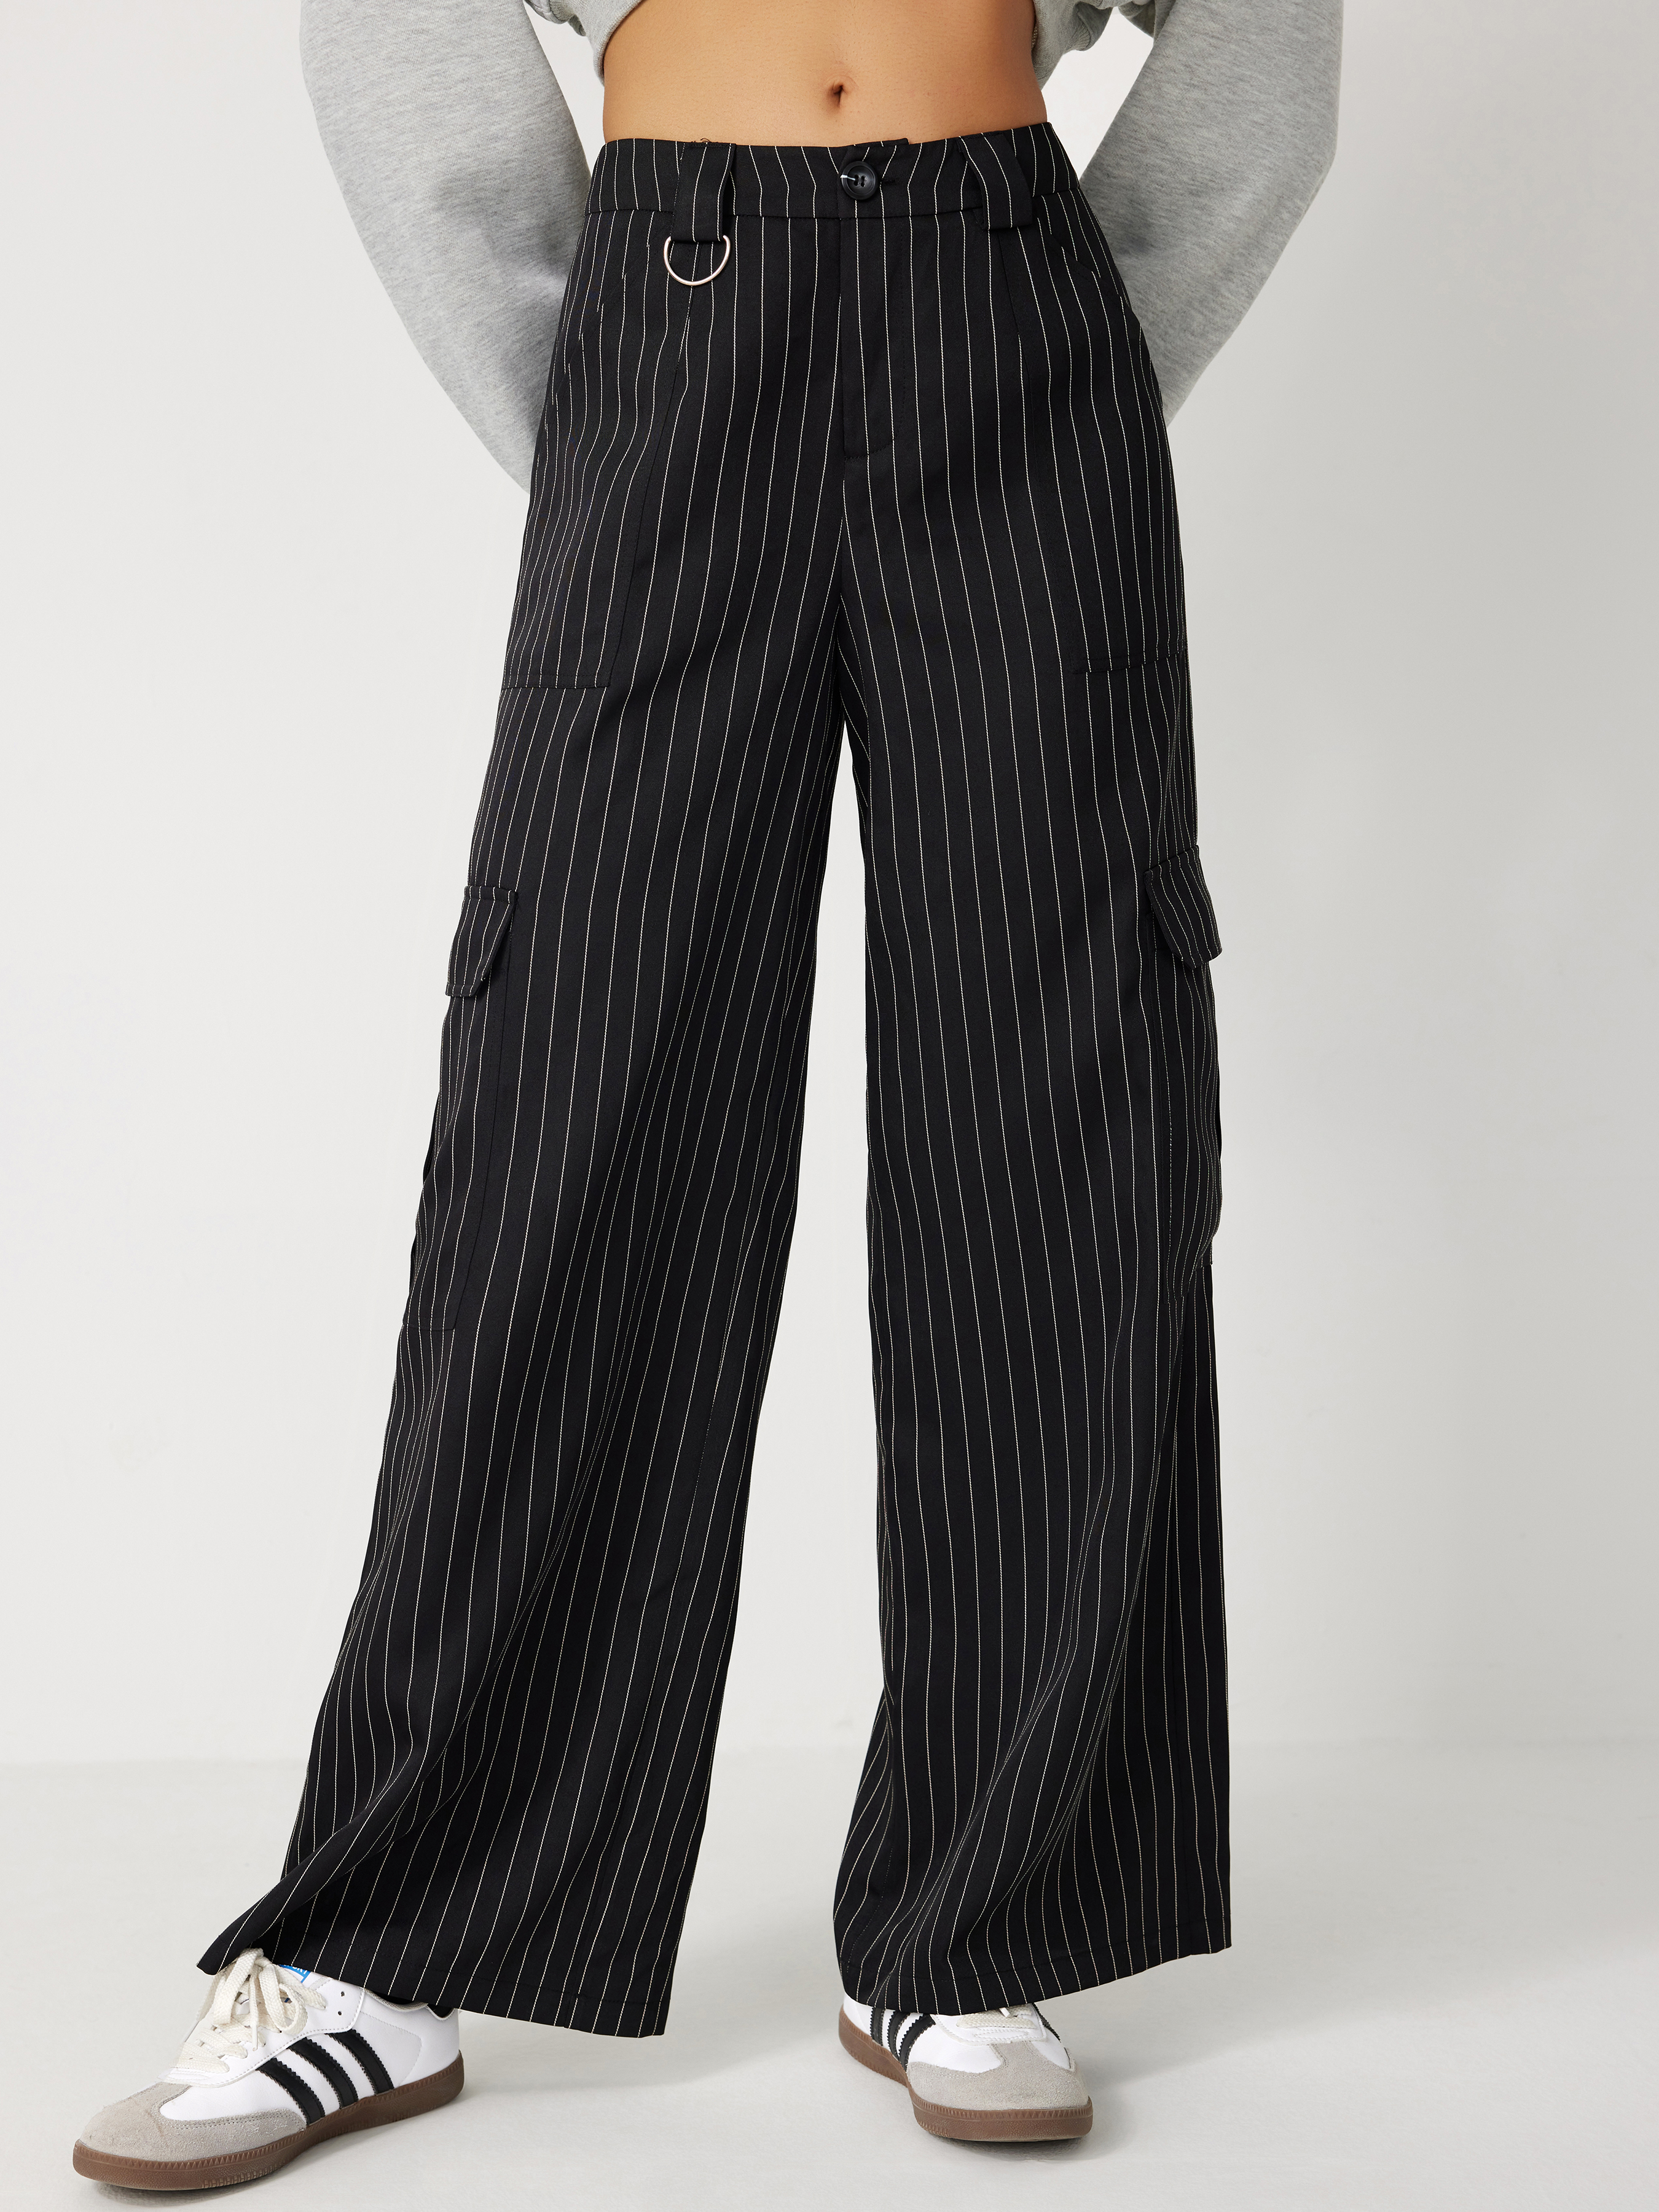 Vintage Pinstripe Wool Trousers in Black Wide Leg Trousers Mid Waist Suit  Pants With Pockets Relaxed Fit Trousers Small Size S - Etsy